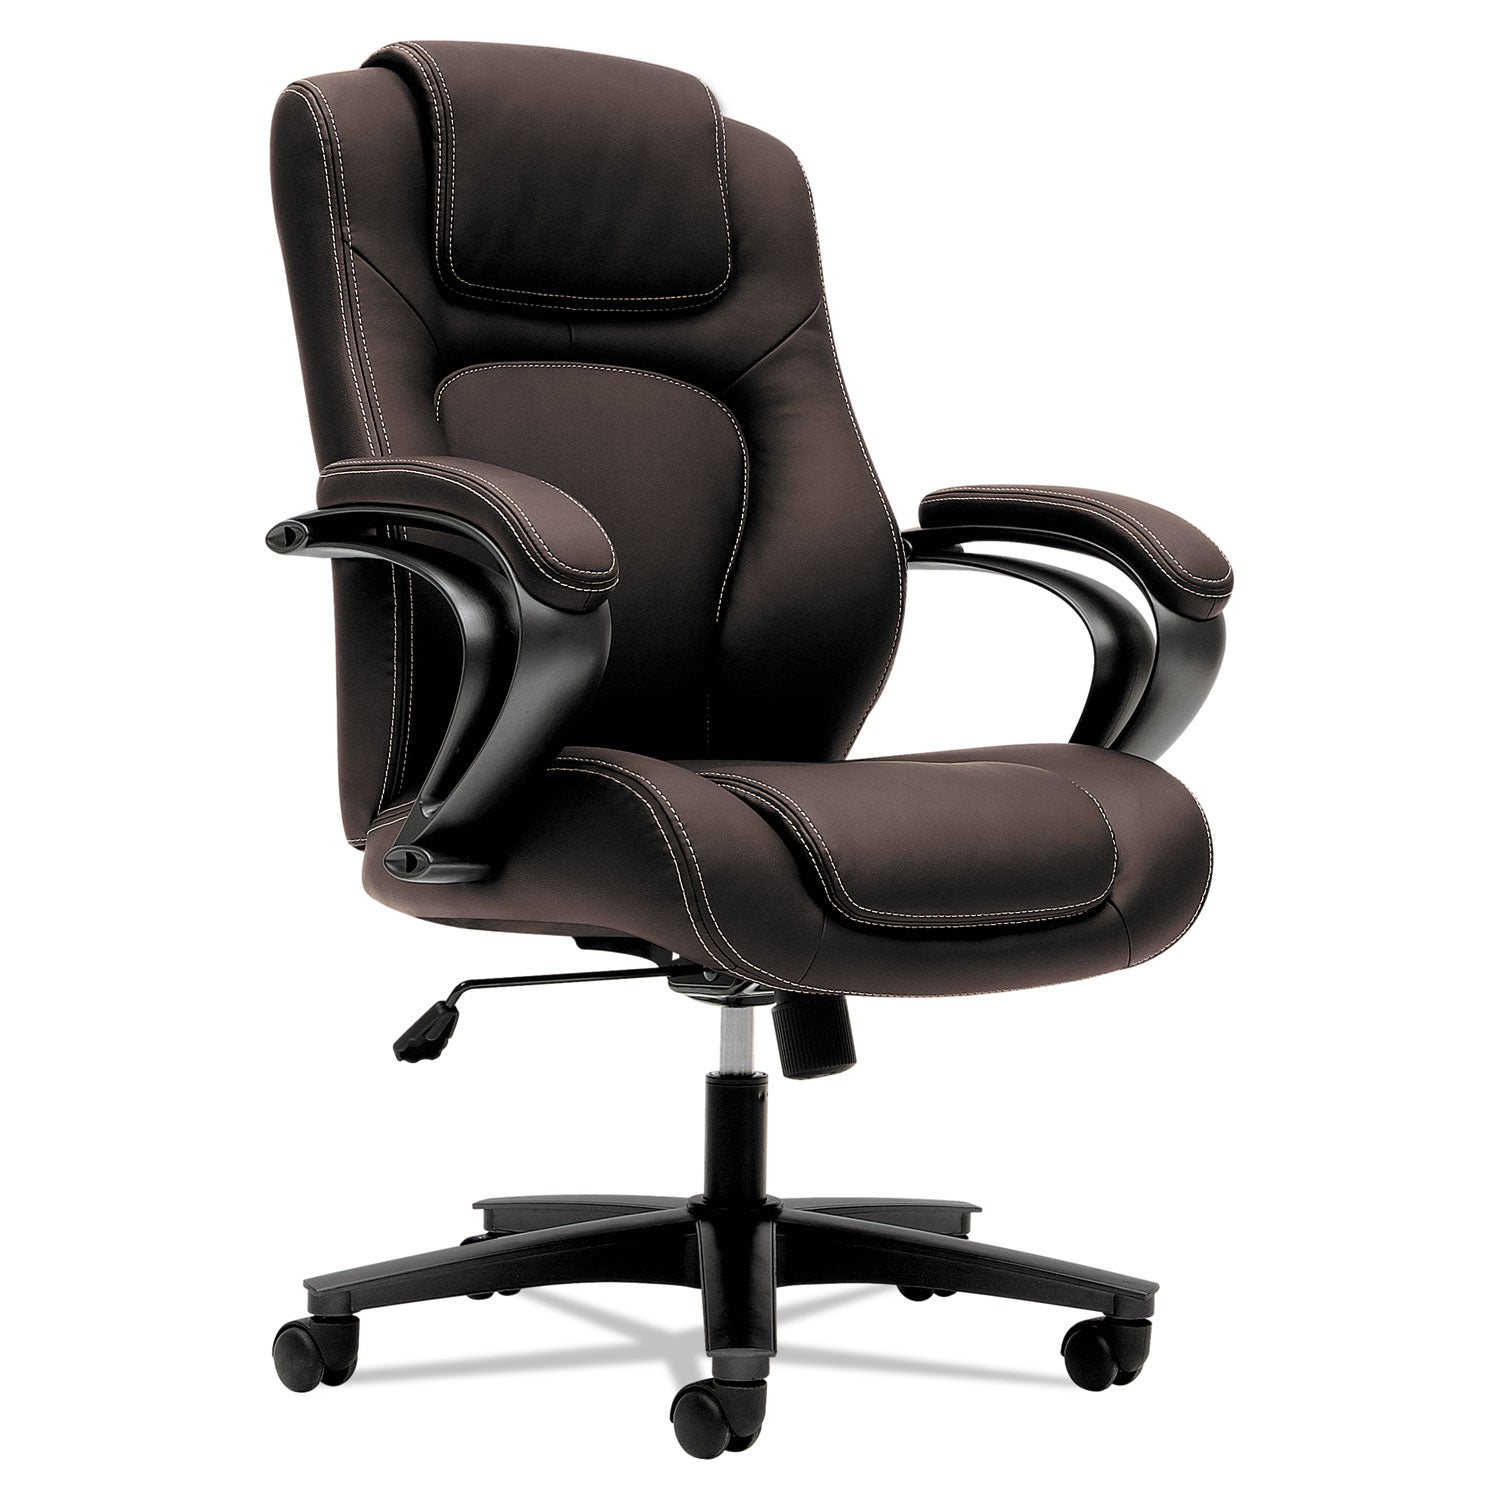 HVL402 Series Executive High-Back Chair, Supports Up to 250 lb, 17" to 21" Seat Height, Brown Seat/Back, Black Base - 